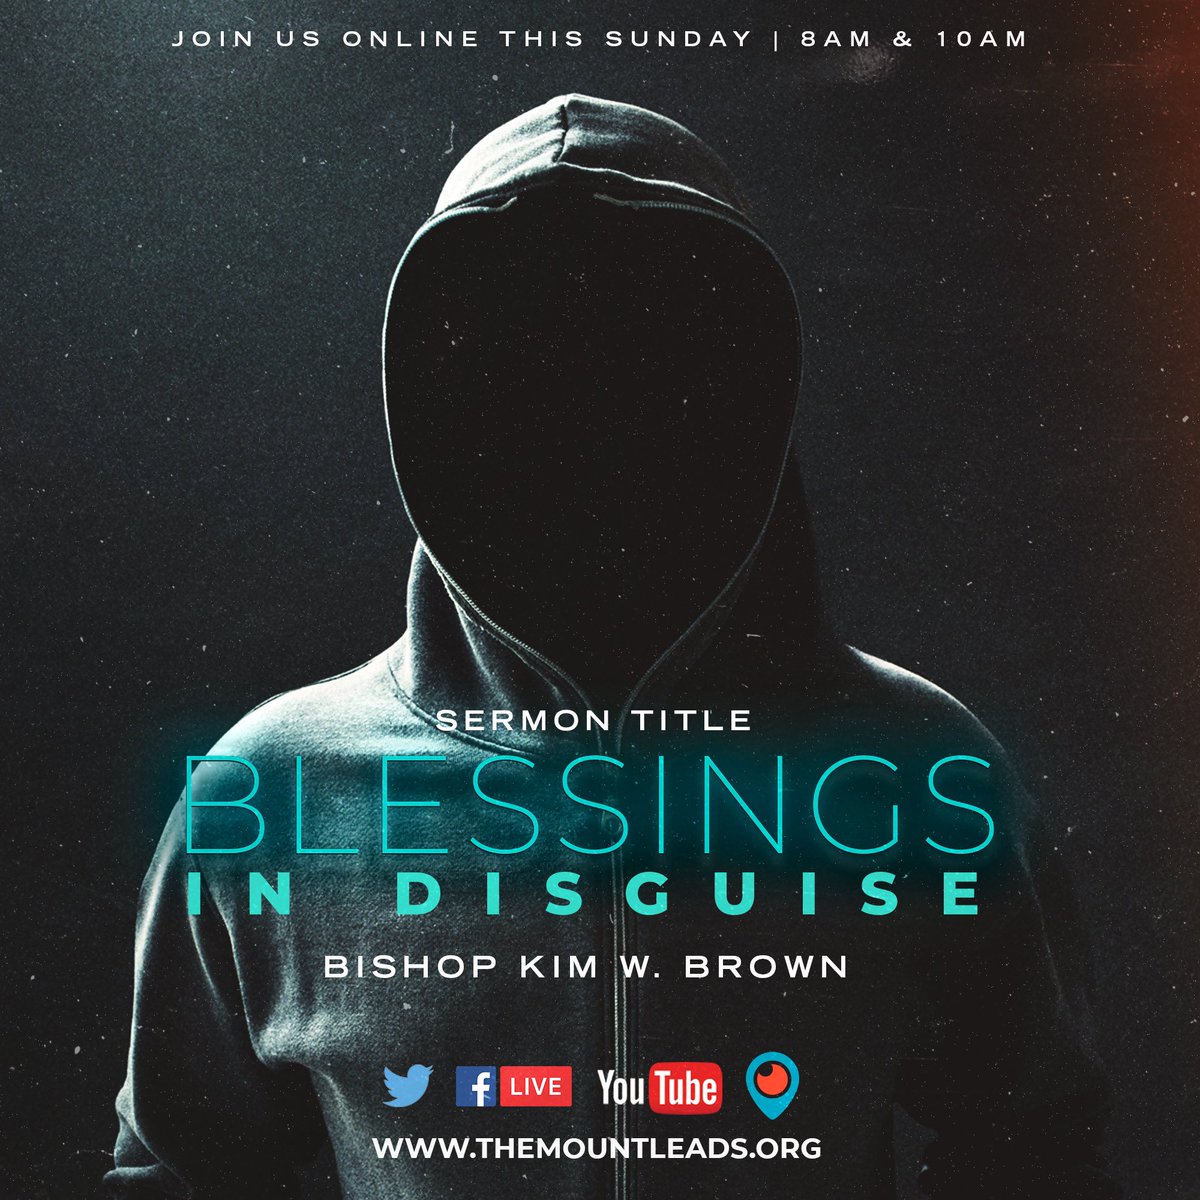 This Sunday don’t miss this word!! #BlessingsInDisguise #TMG360